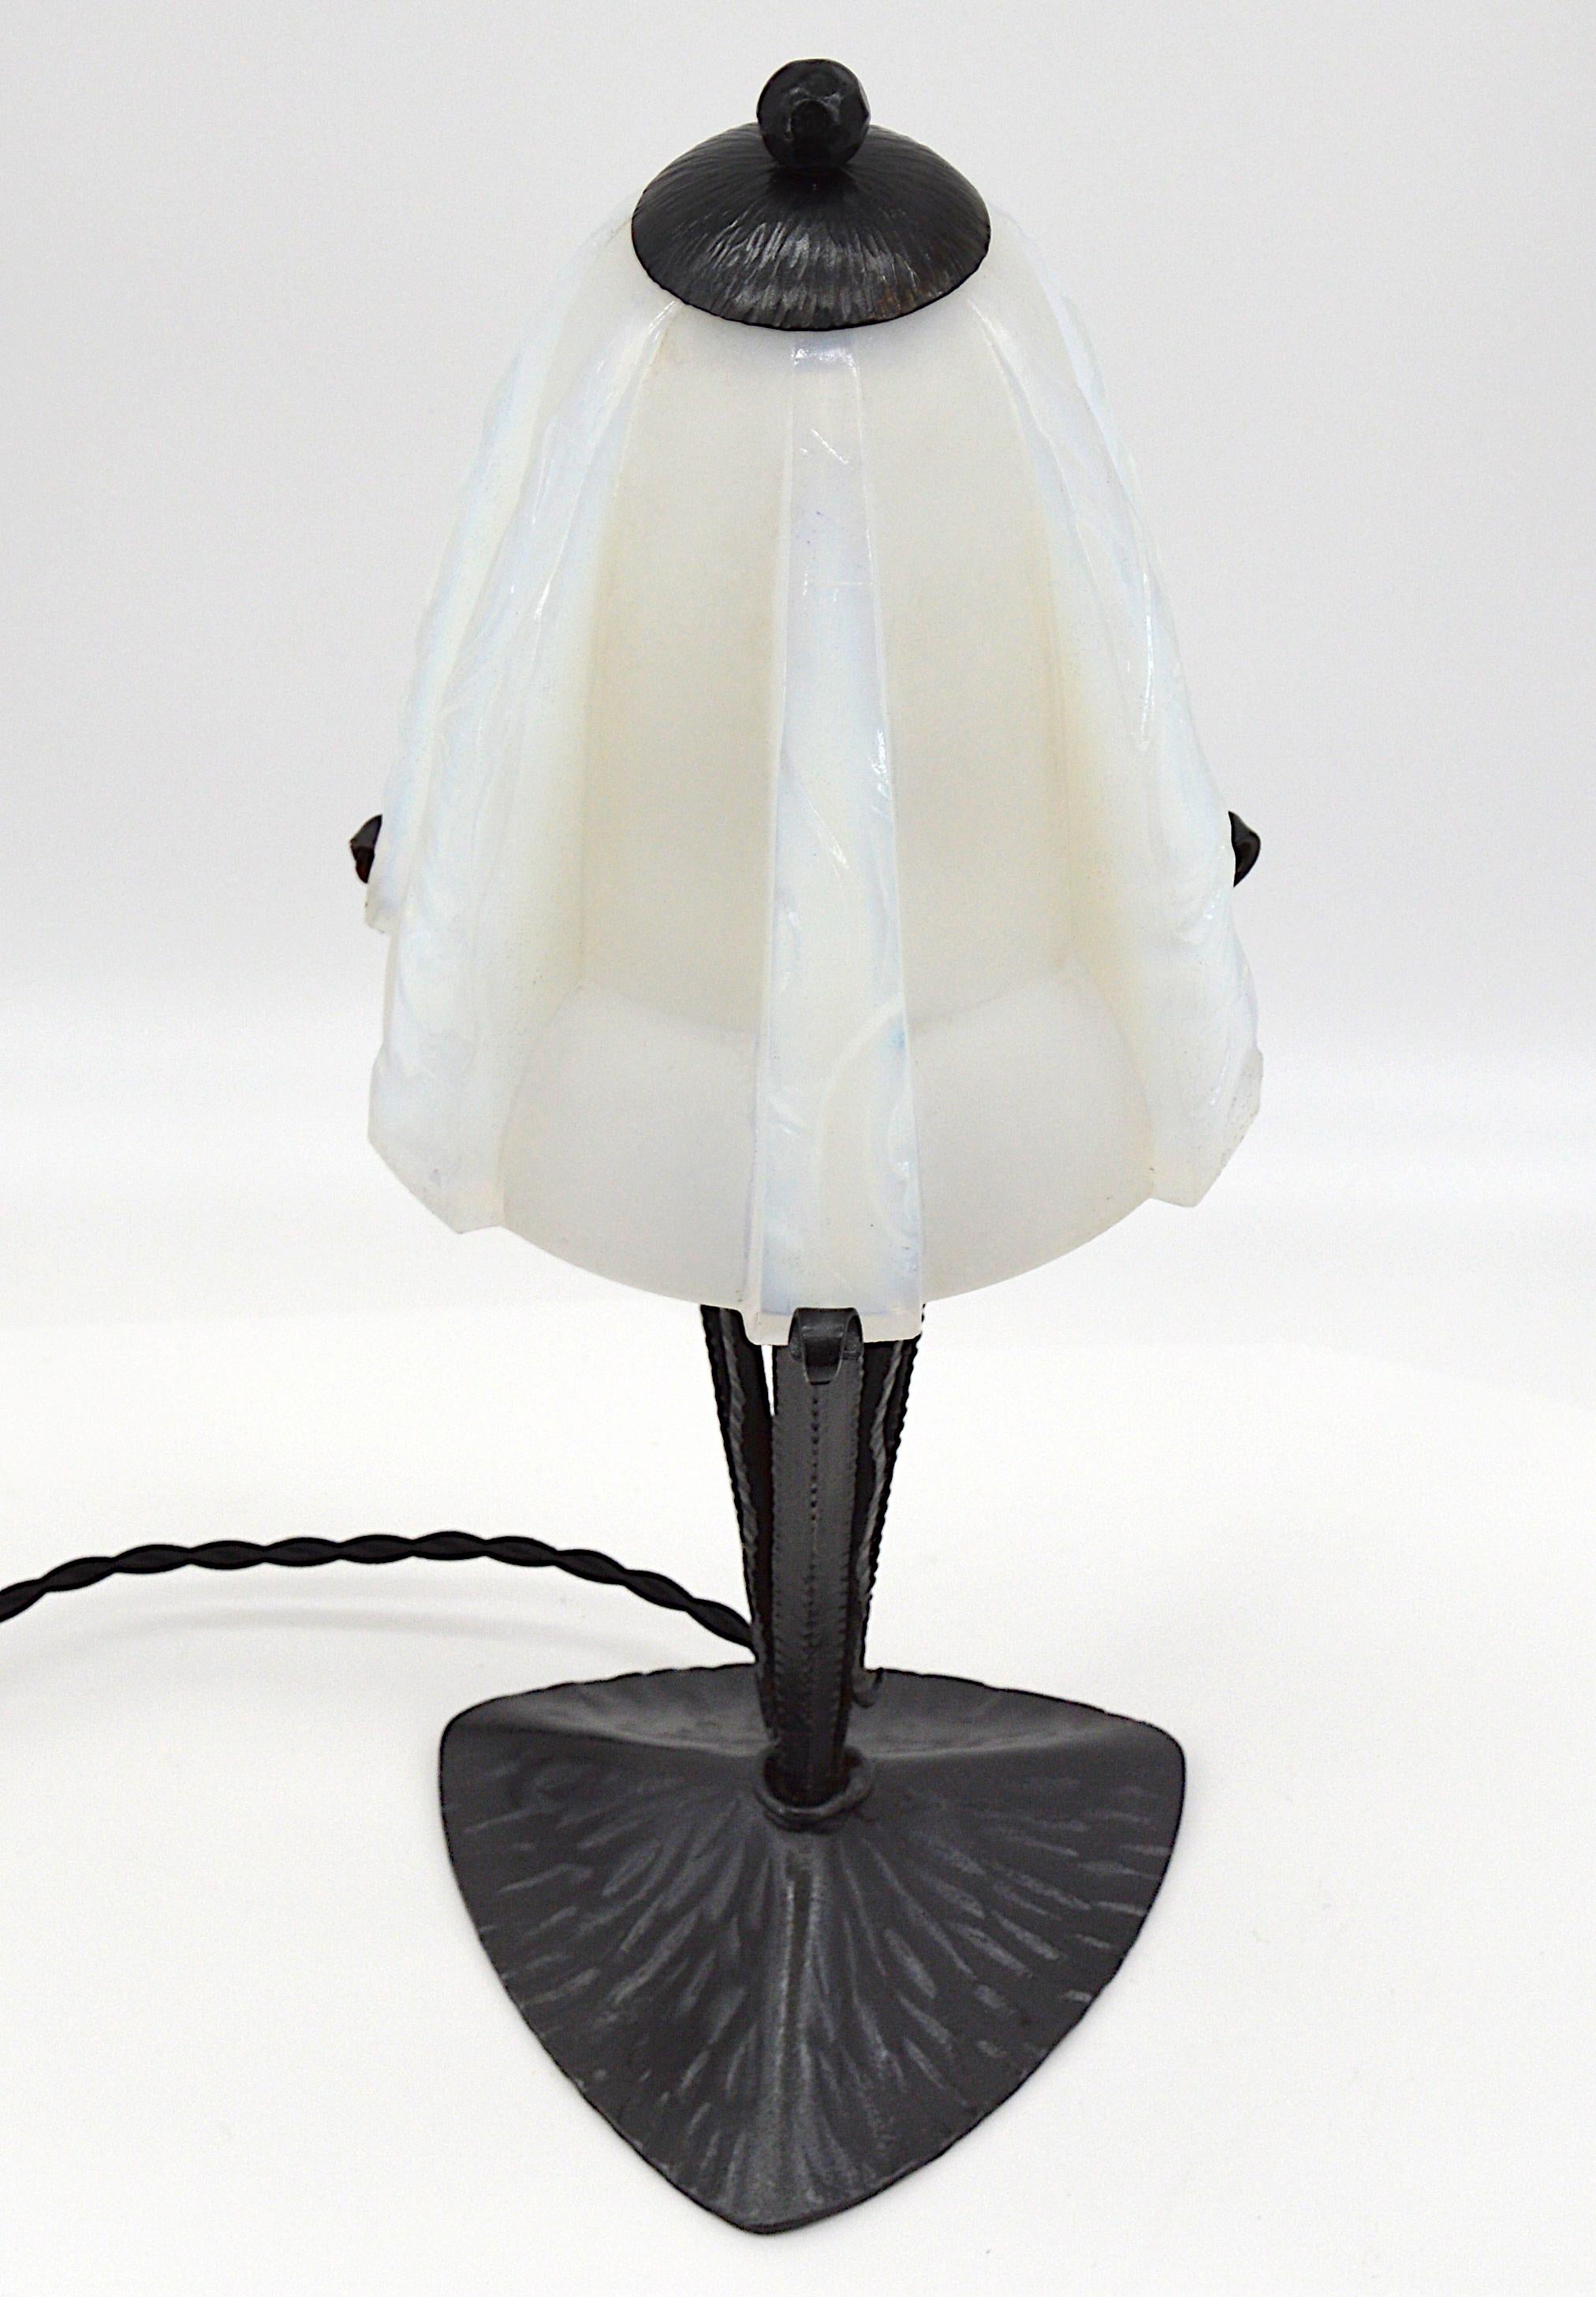 Jean Gauthier French Art Deco Opalescent Table Lamp, 1930s For Sale 2